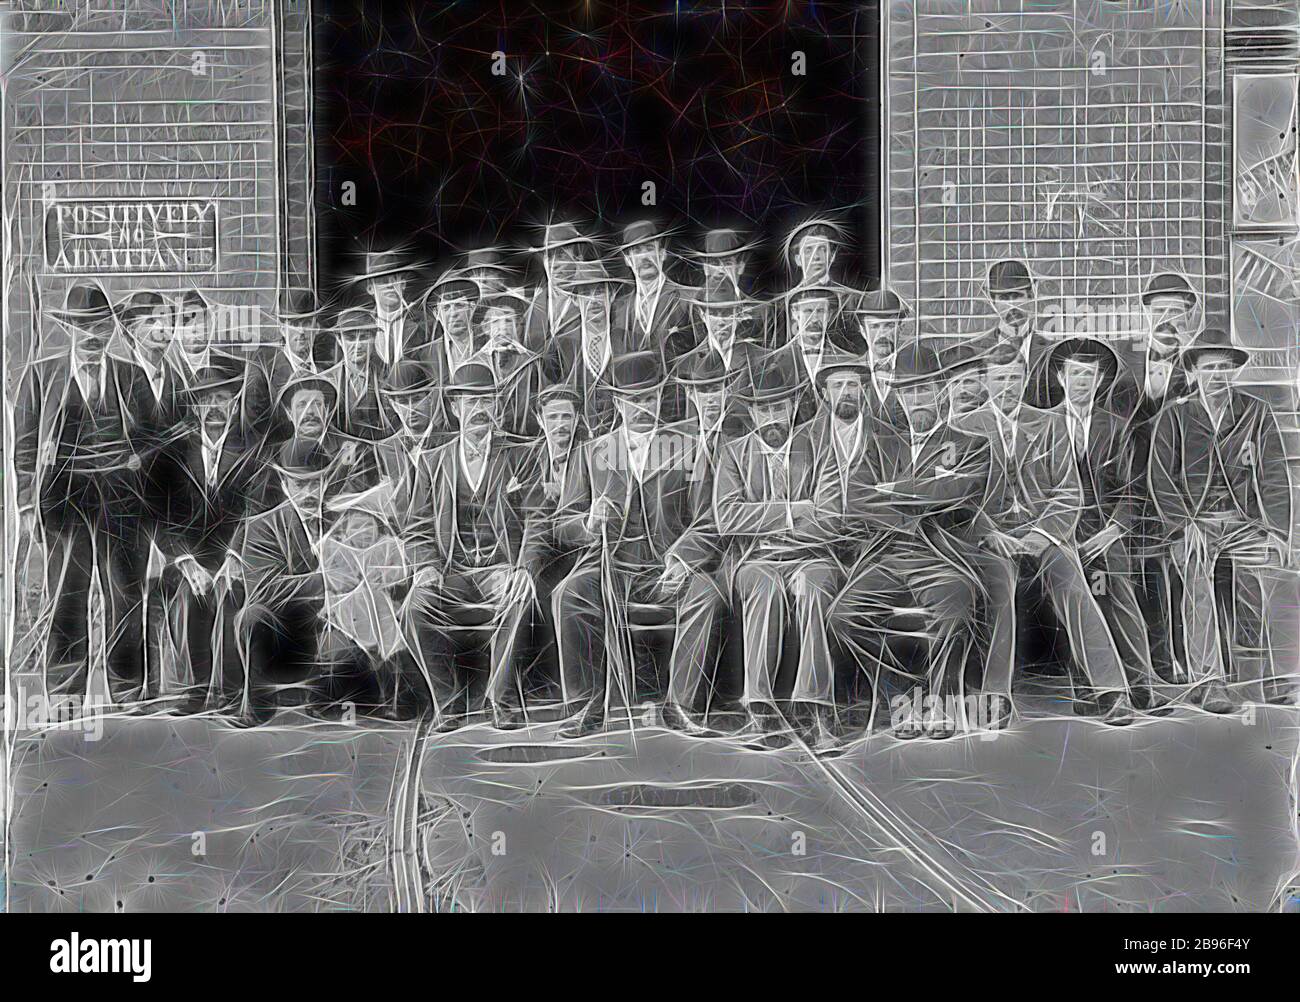 Negative - Bendigo, Victoria, circa 1905, A group of men at a tram entrance of the Bendigo Tramways. The men are all well-dressed and one holds a baby on his knee., Reimagined by Gibon, design of warm cheerful glowing of brightness and light rays radiance. Classic art reinvented with a modern twist. Photography inspired by futurism, embracing dynamic energy of modern technology, movement, speed and revolutionize culture. Stock Photo